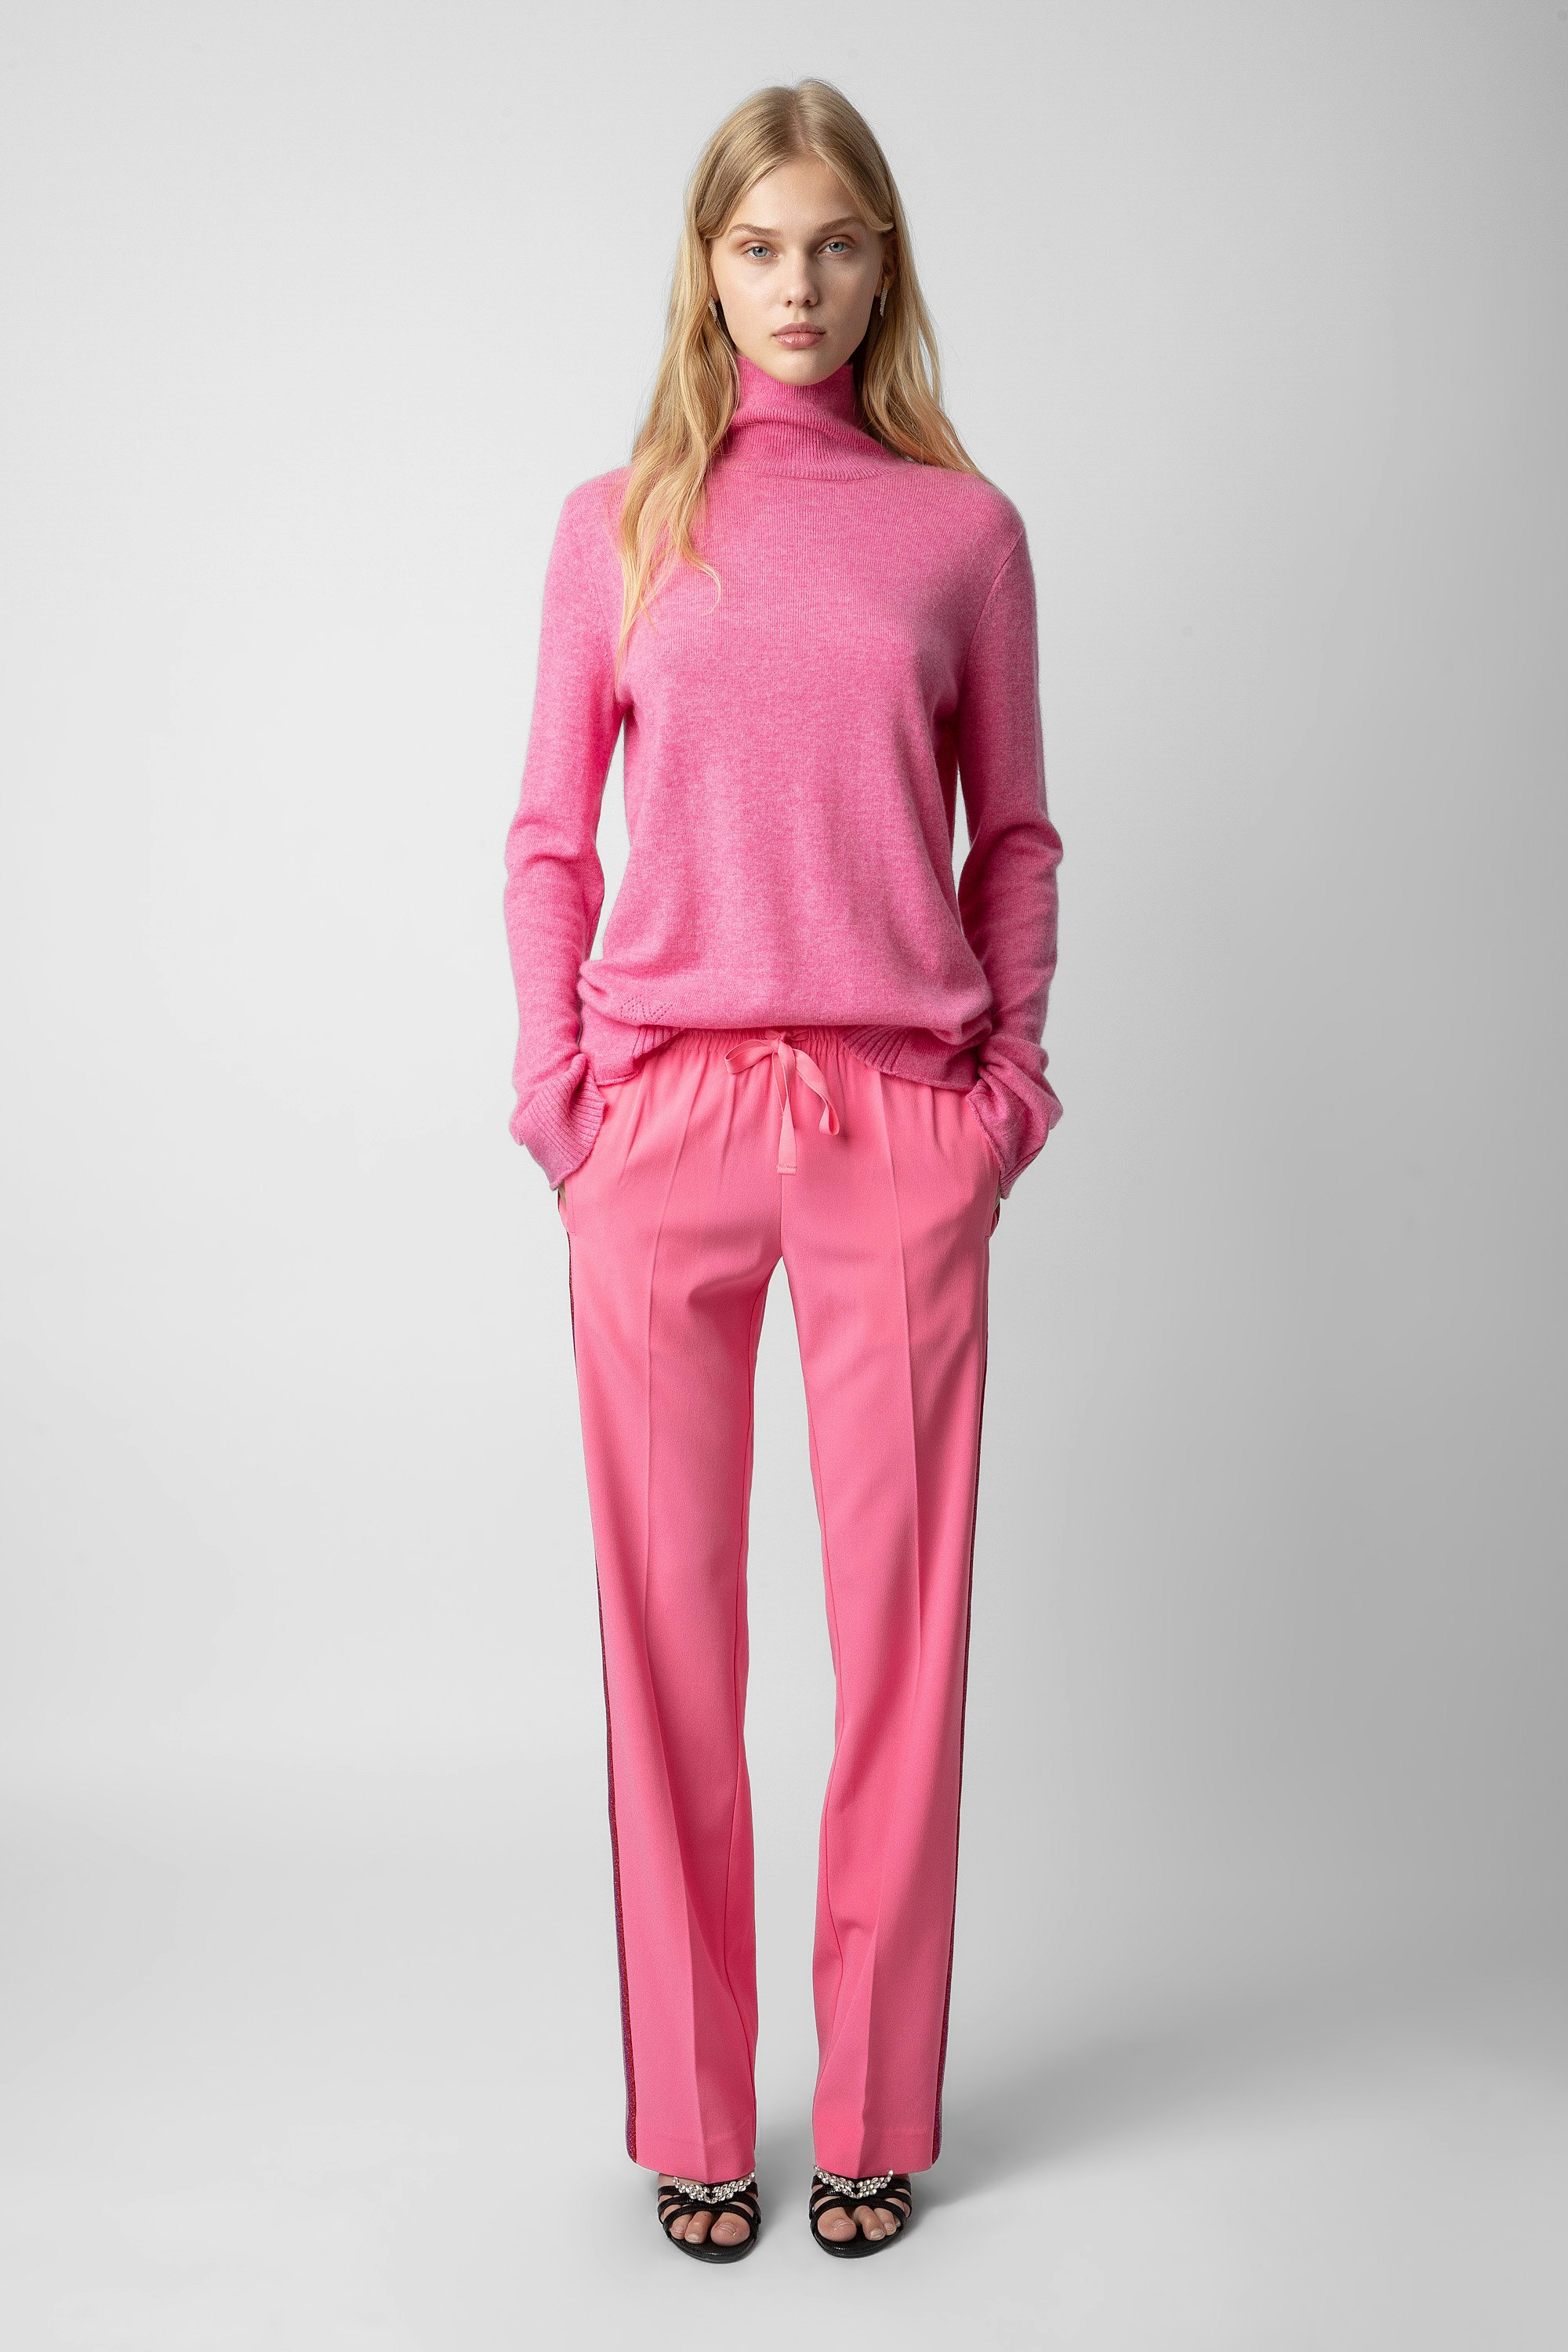 Pomy Trousers - Women’s pink crepe trousers with glittery side bands